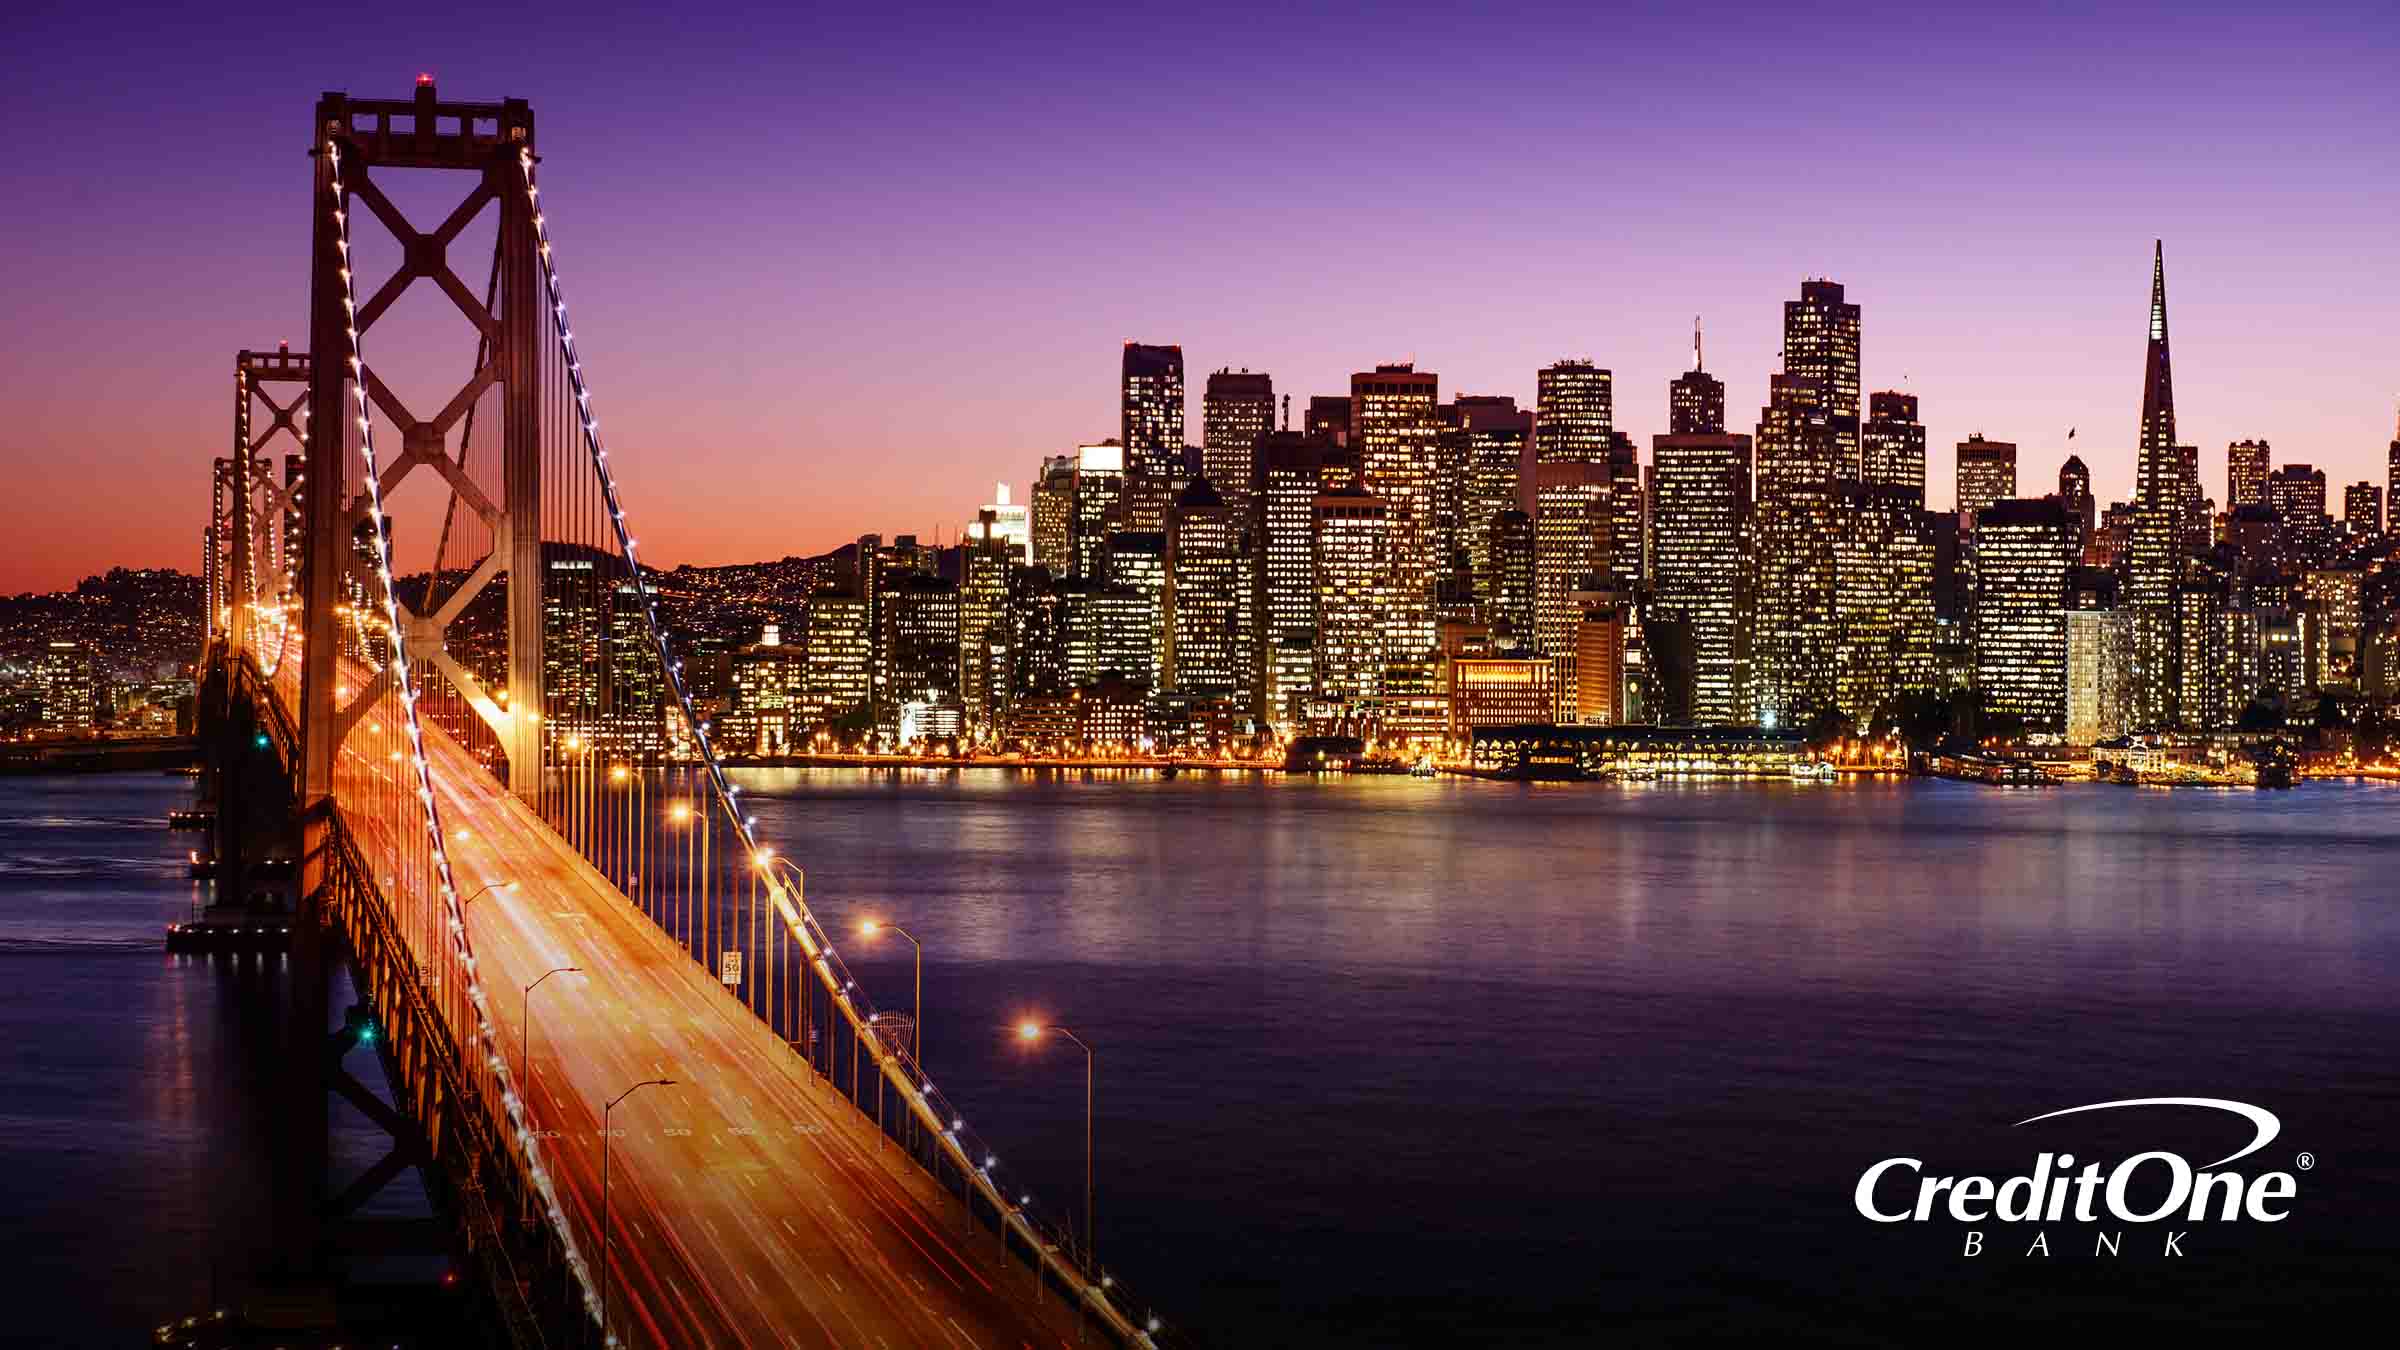 Skyline of San Francisco, full of must-see attractions